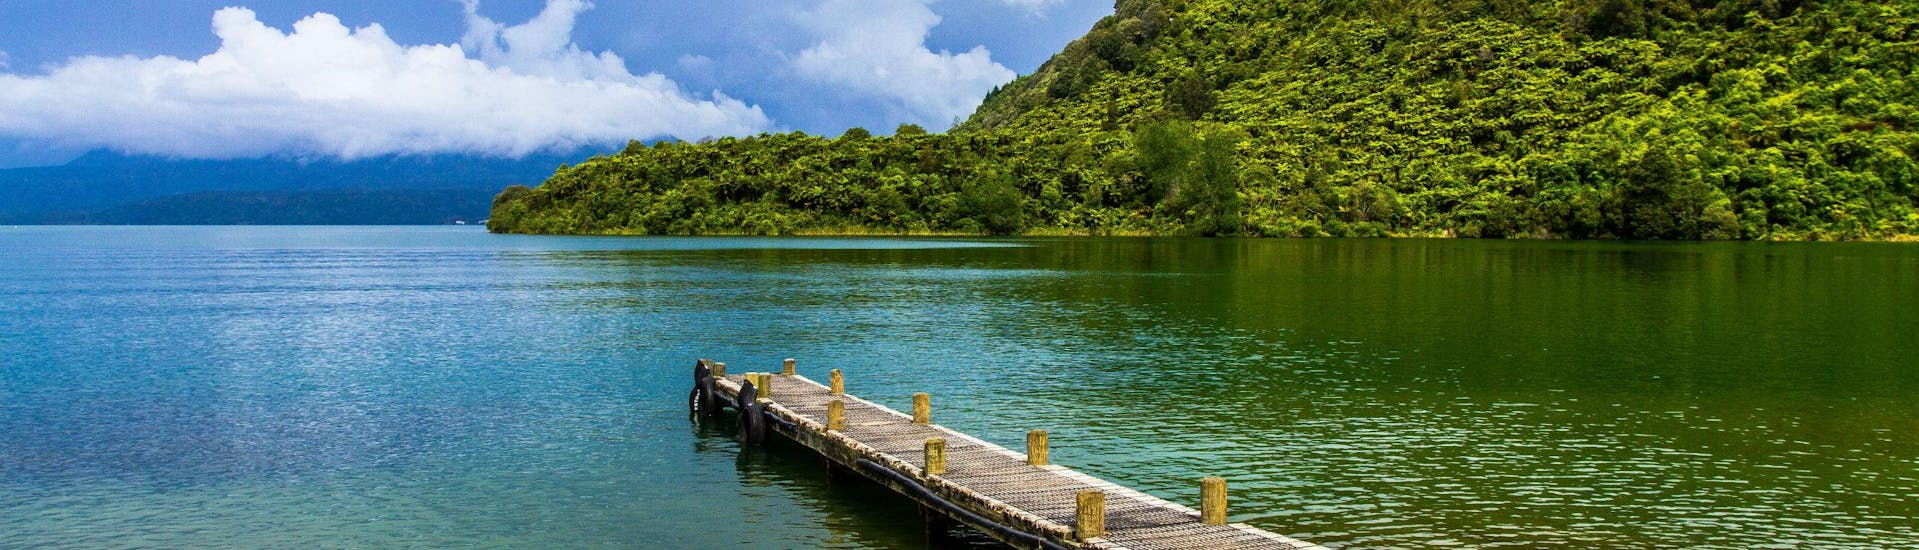 An image of a jetty leading into the clear waters of Lake Tarawera in the Rotorua region, a popular hotspot for kayaking in New Zealand.